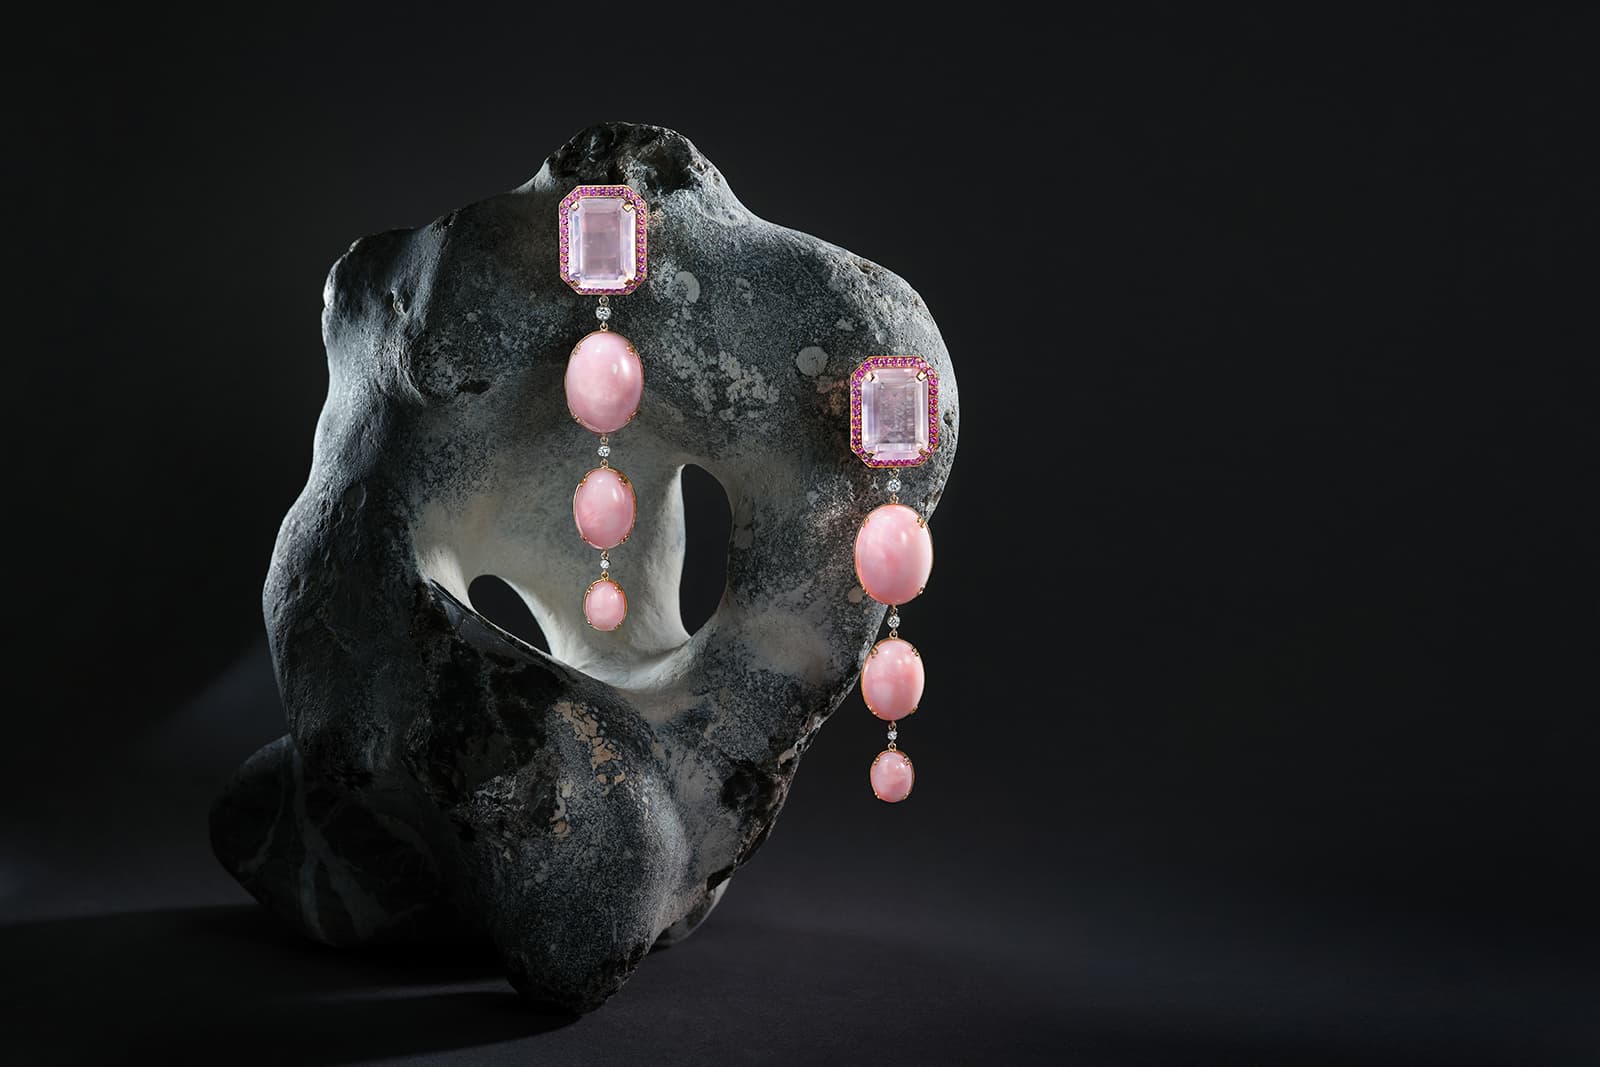 Reflection earrings by Sabine Roemer set with rose quartz, pink opal cabochons, pink sapphires and 0.2cts of white diamonds